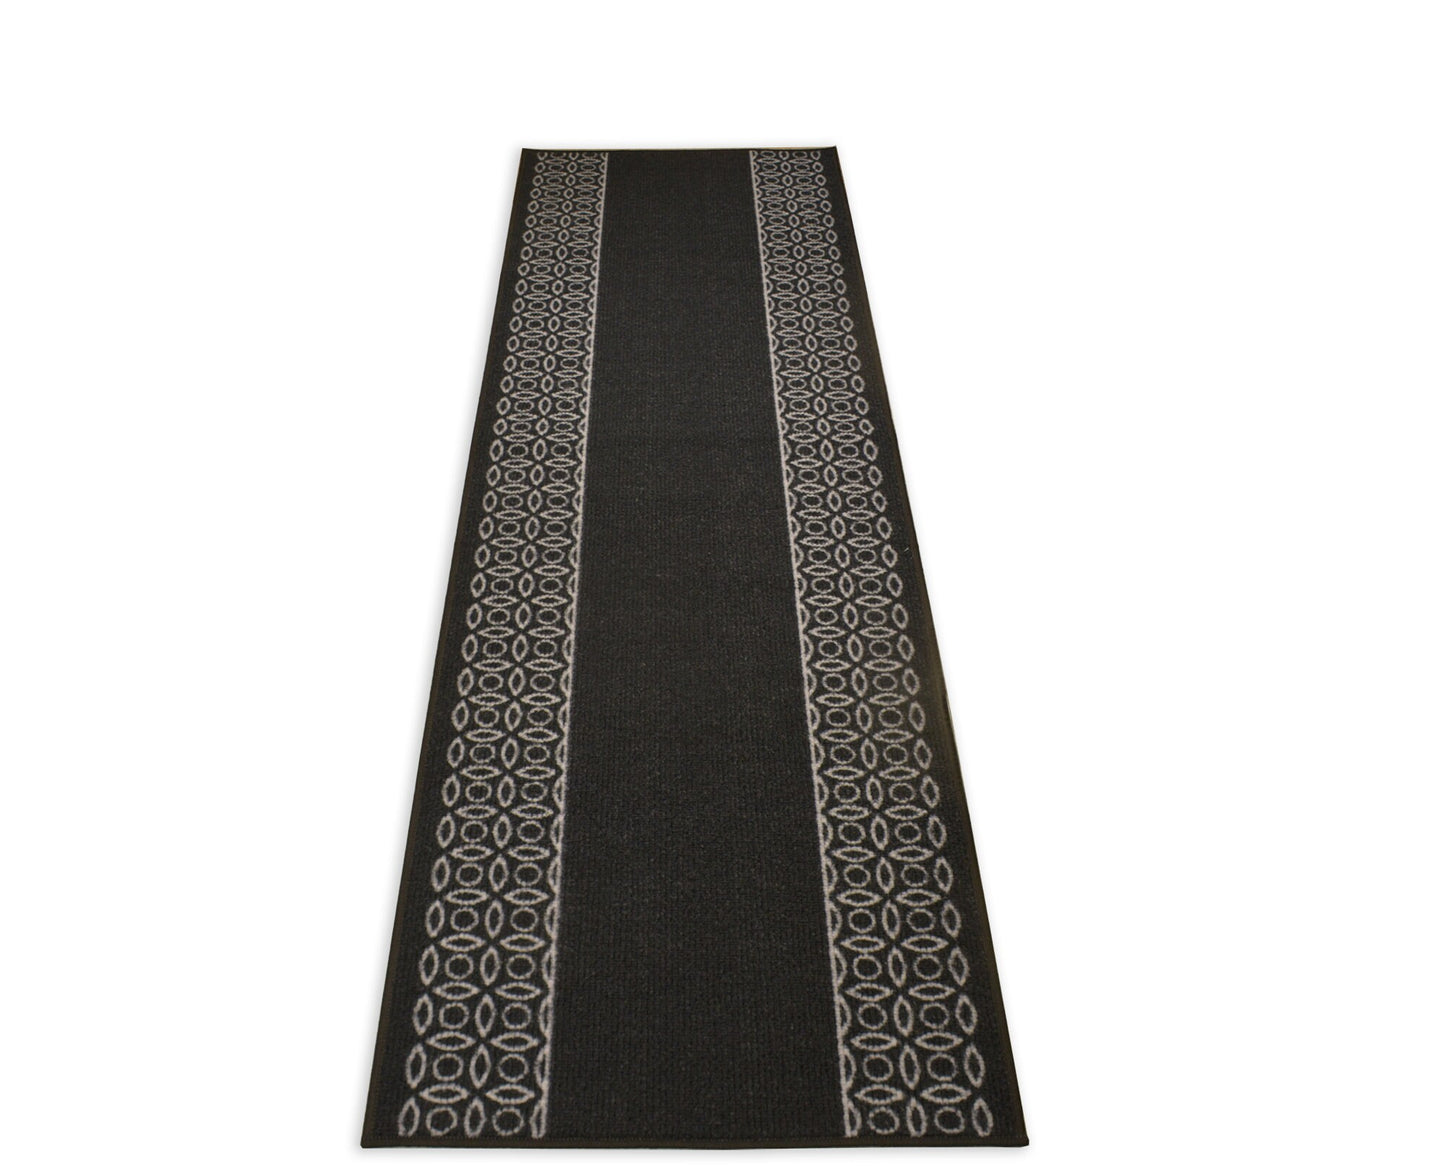 Colorado Collection Custom Size Runner Rug Berber Chain Bordered Black Skid Resistant Cut To Size Skid Resistant Rug Runner Customize By Feet and 26 inch Width